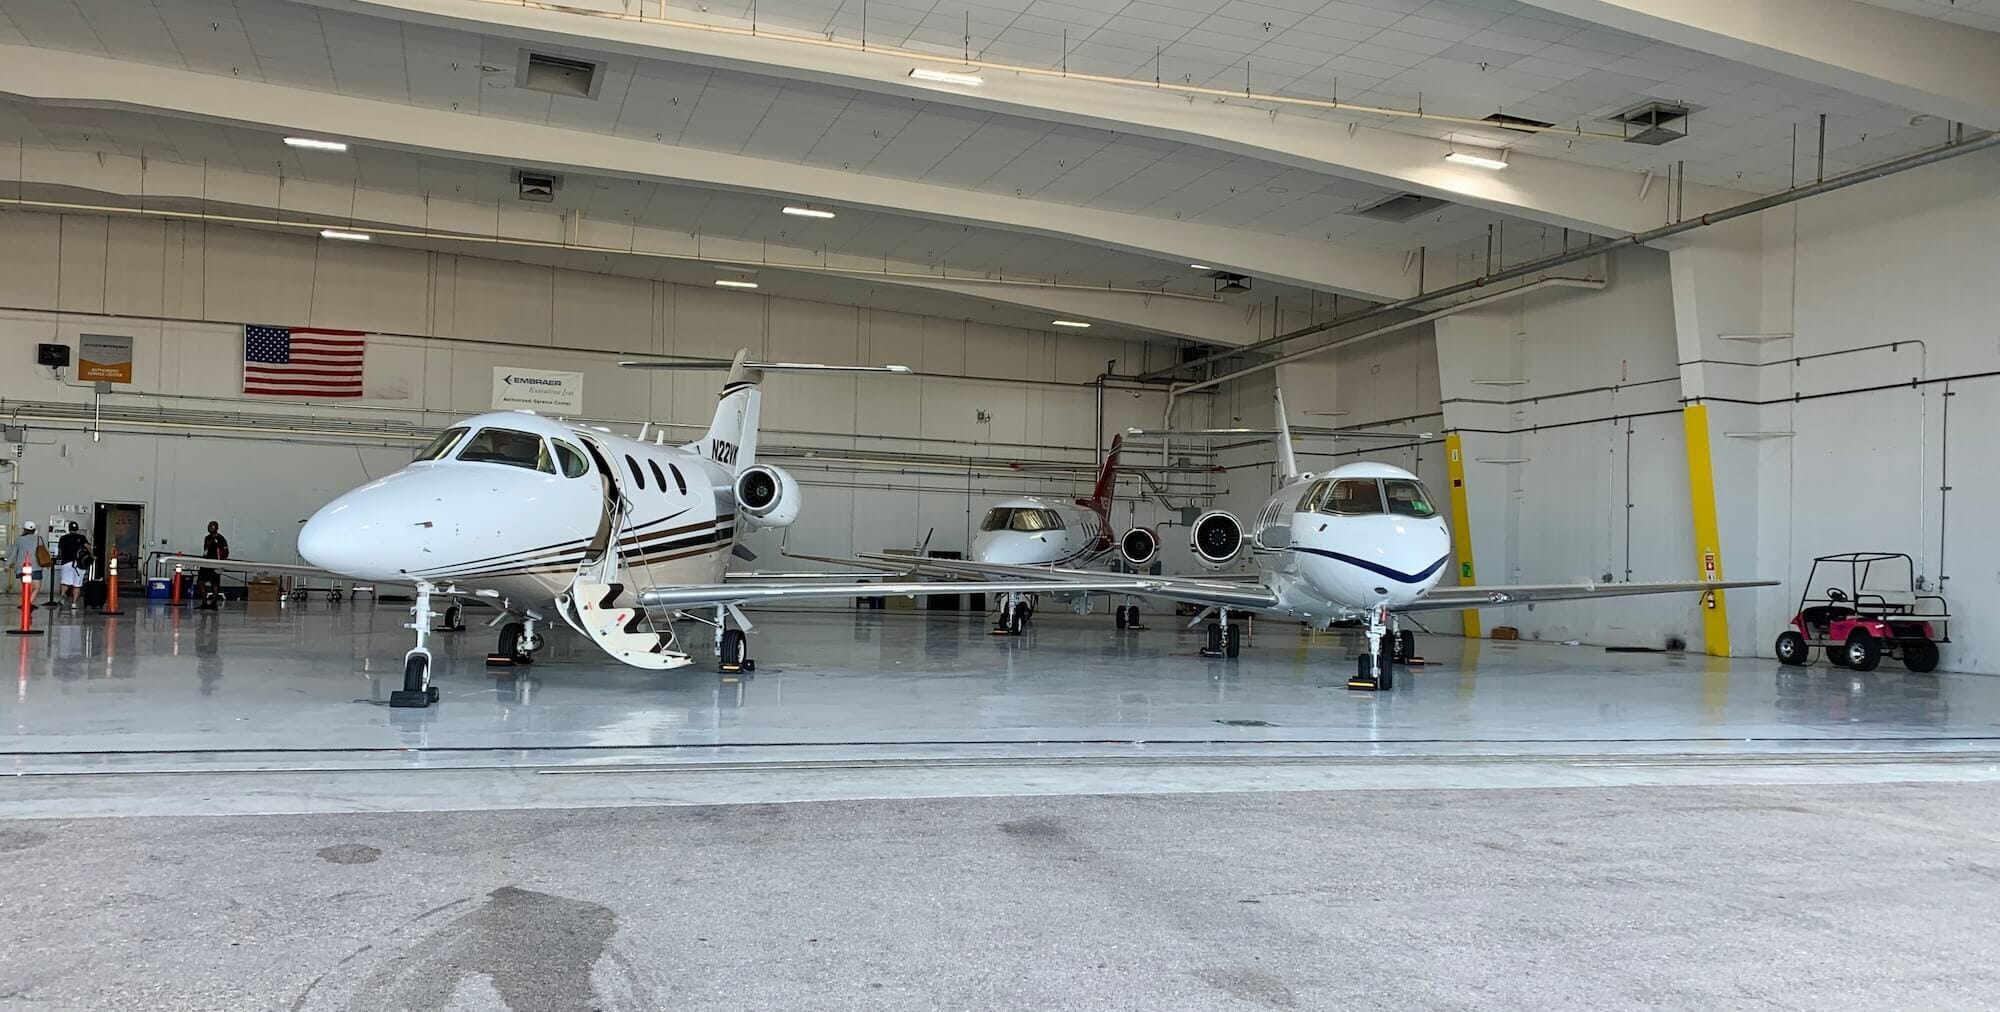 Private jets in airport hangar